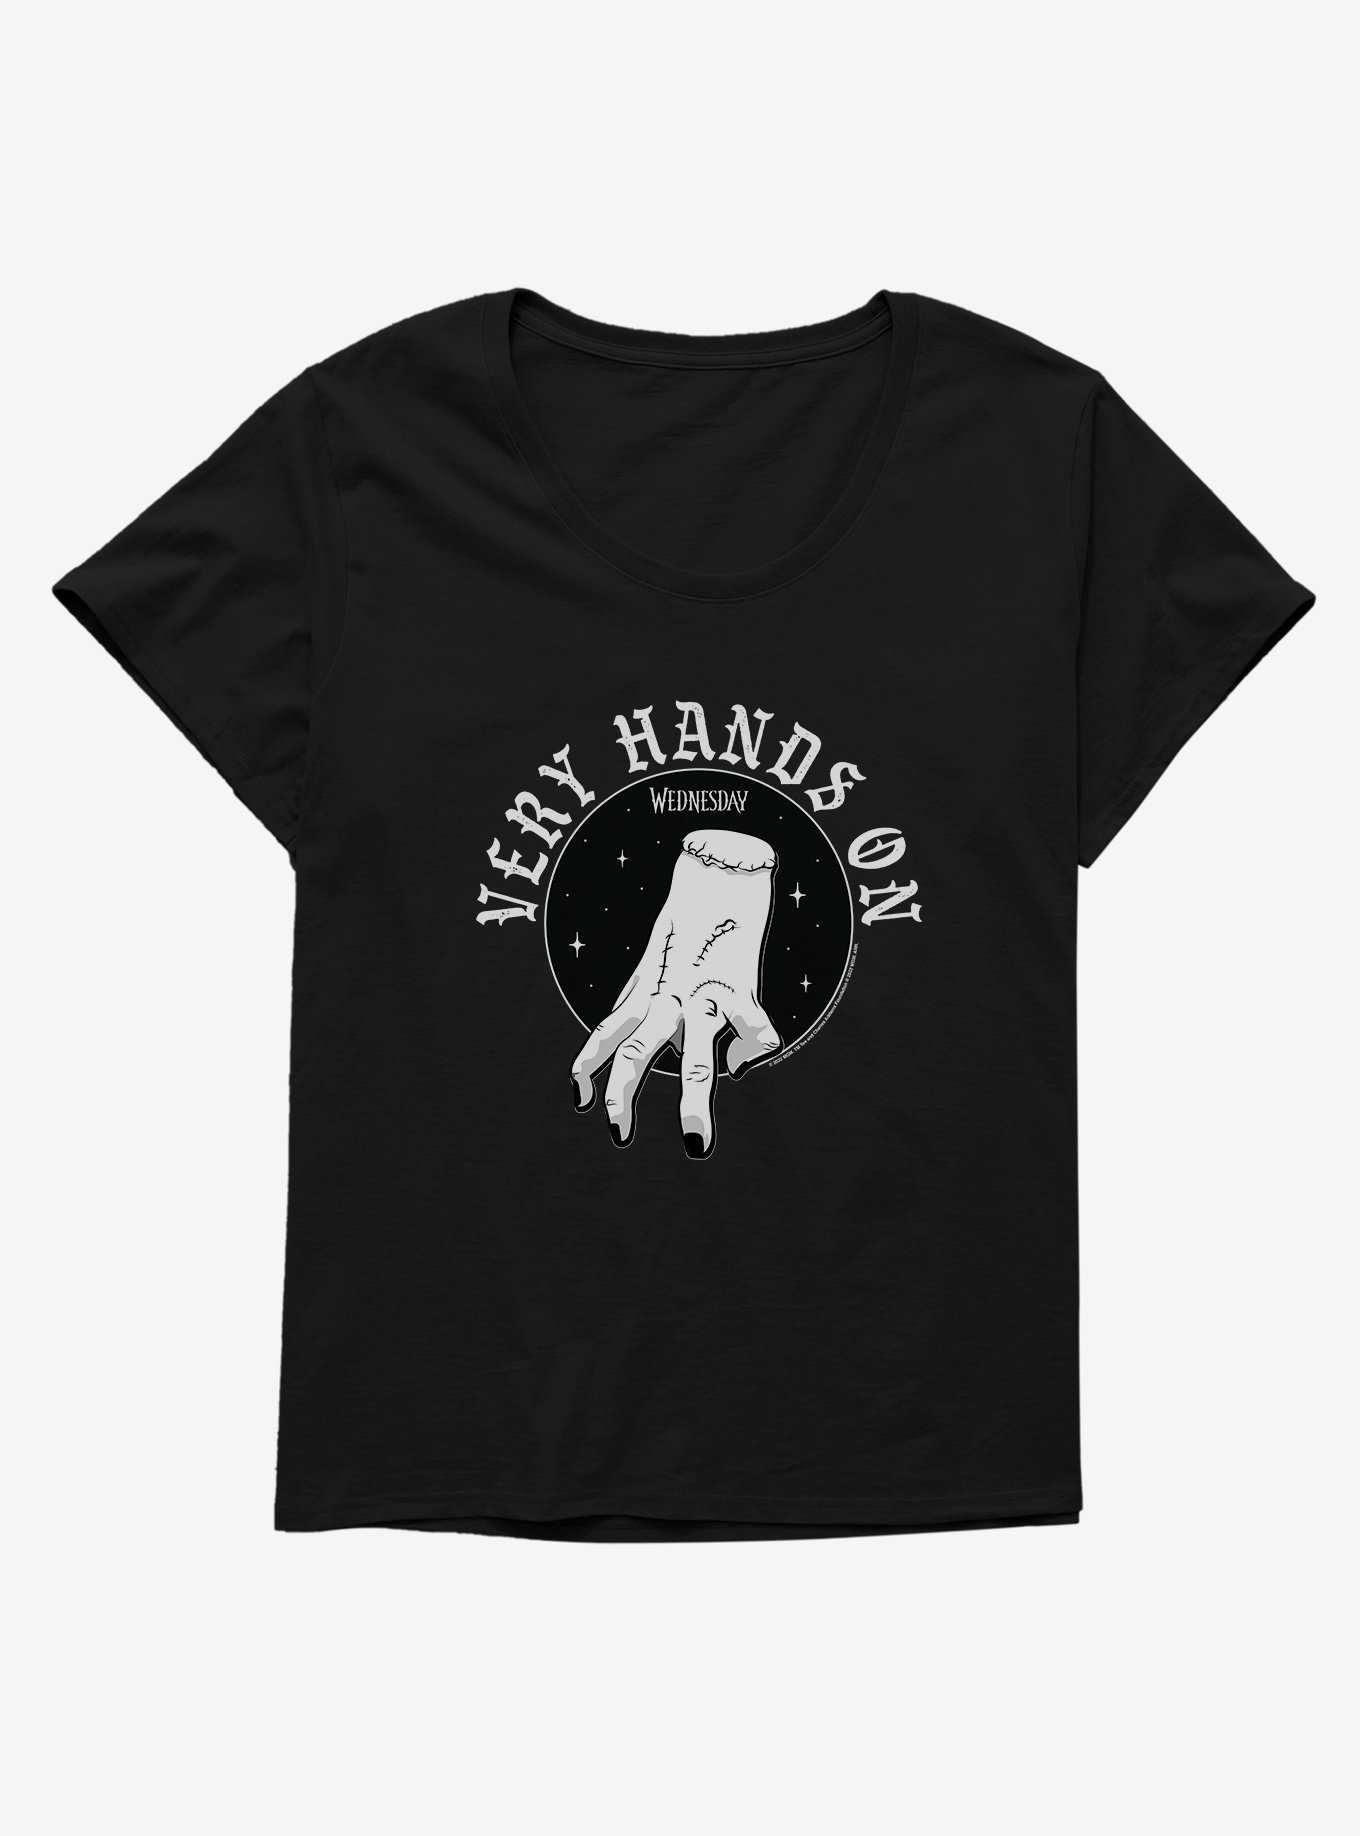 Wednesday The Thing Very Hands On Womens T-Shirt Plus Size, , hi-res